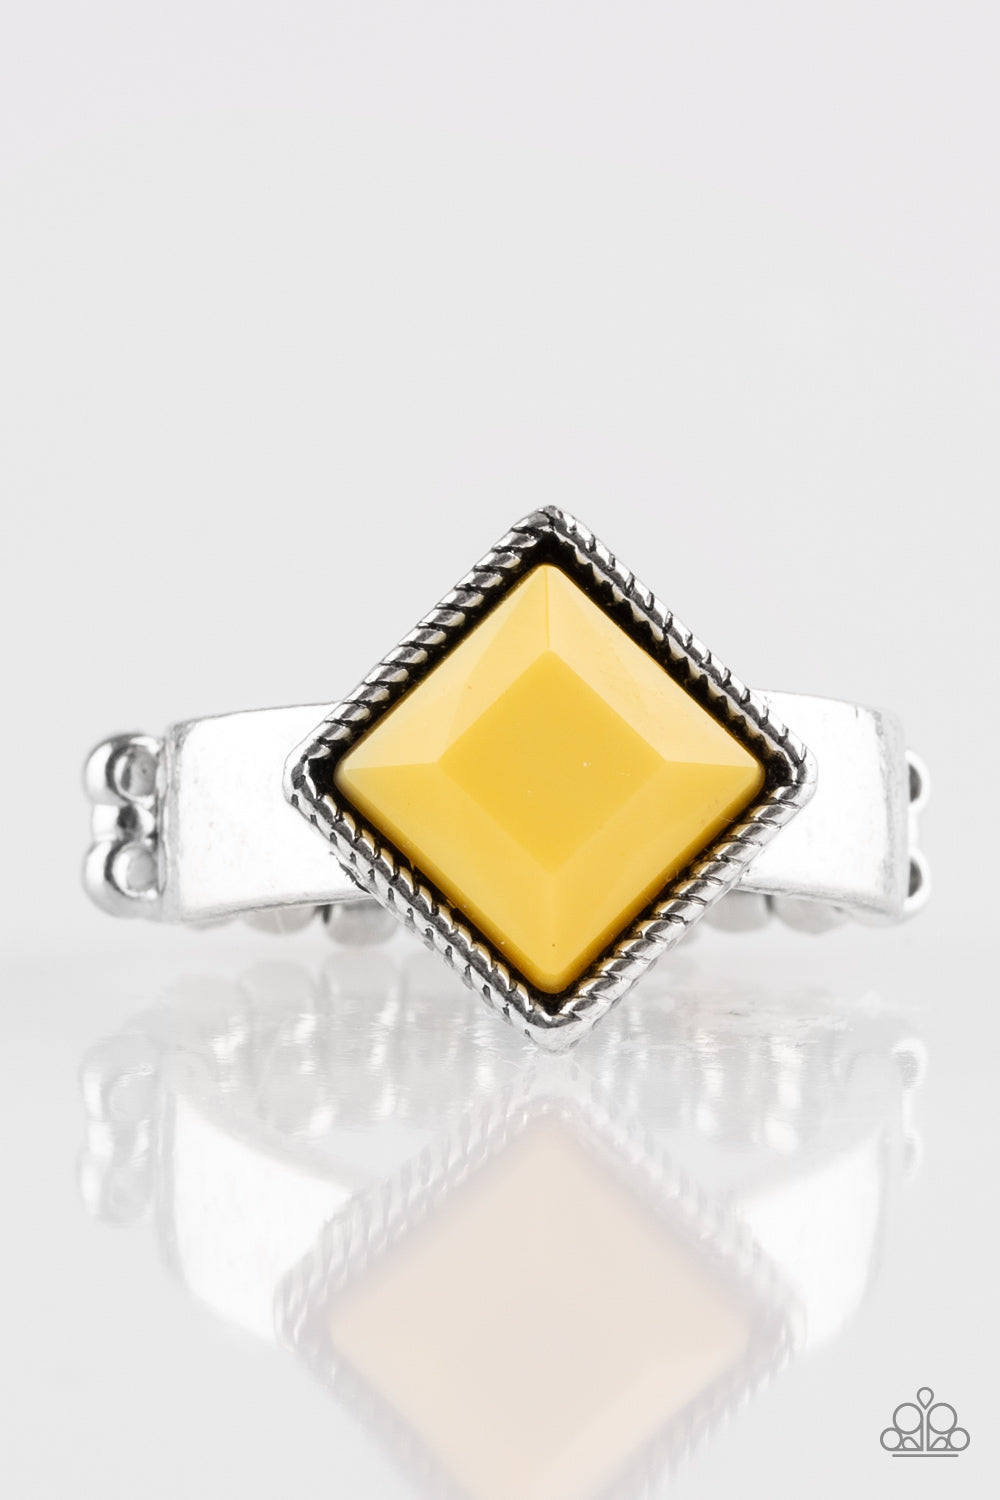 Stylishly Fair and Square - Yellow